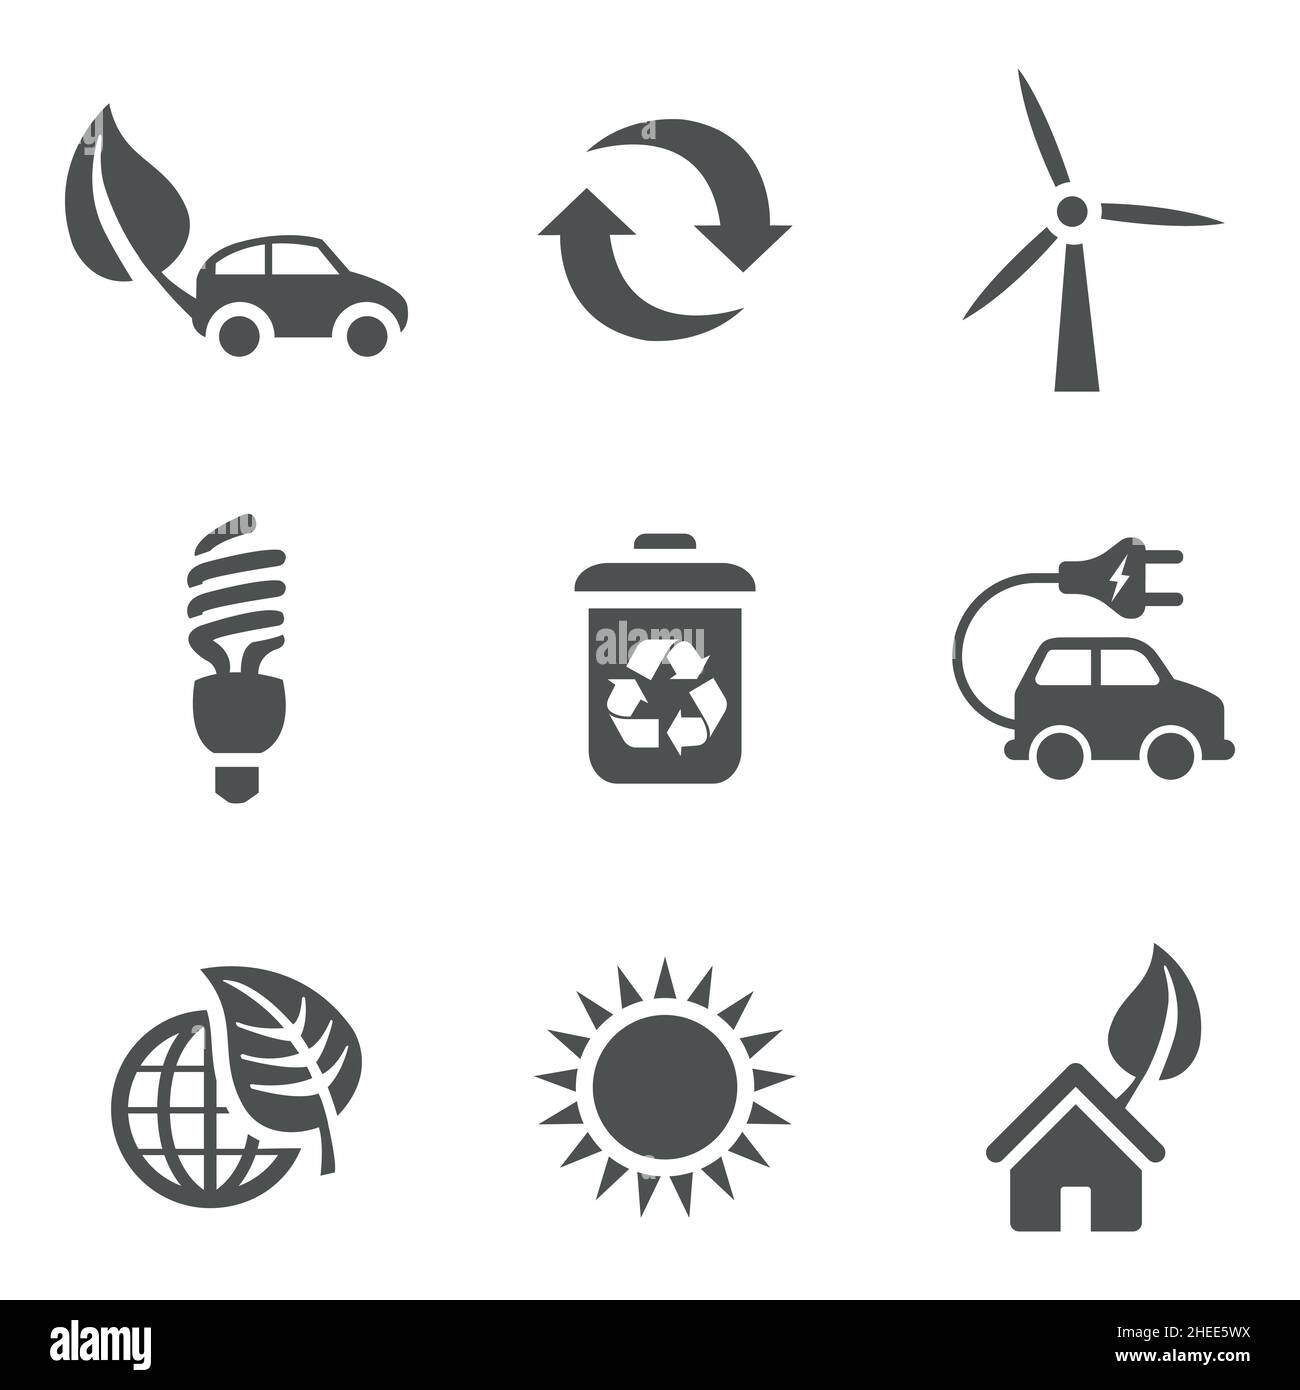 Ecology and Environment Icons. For Mobile and Web. Contains such icons as Ecology, Environment, Lightbulb, Green Energy. EPS 10 Stock Vector